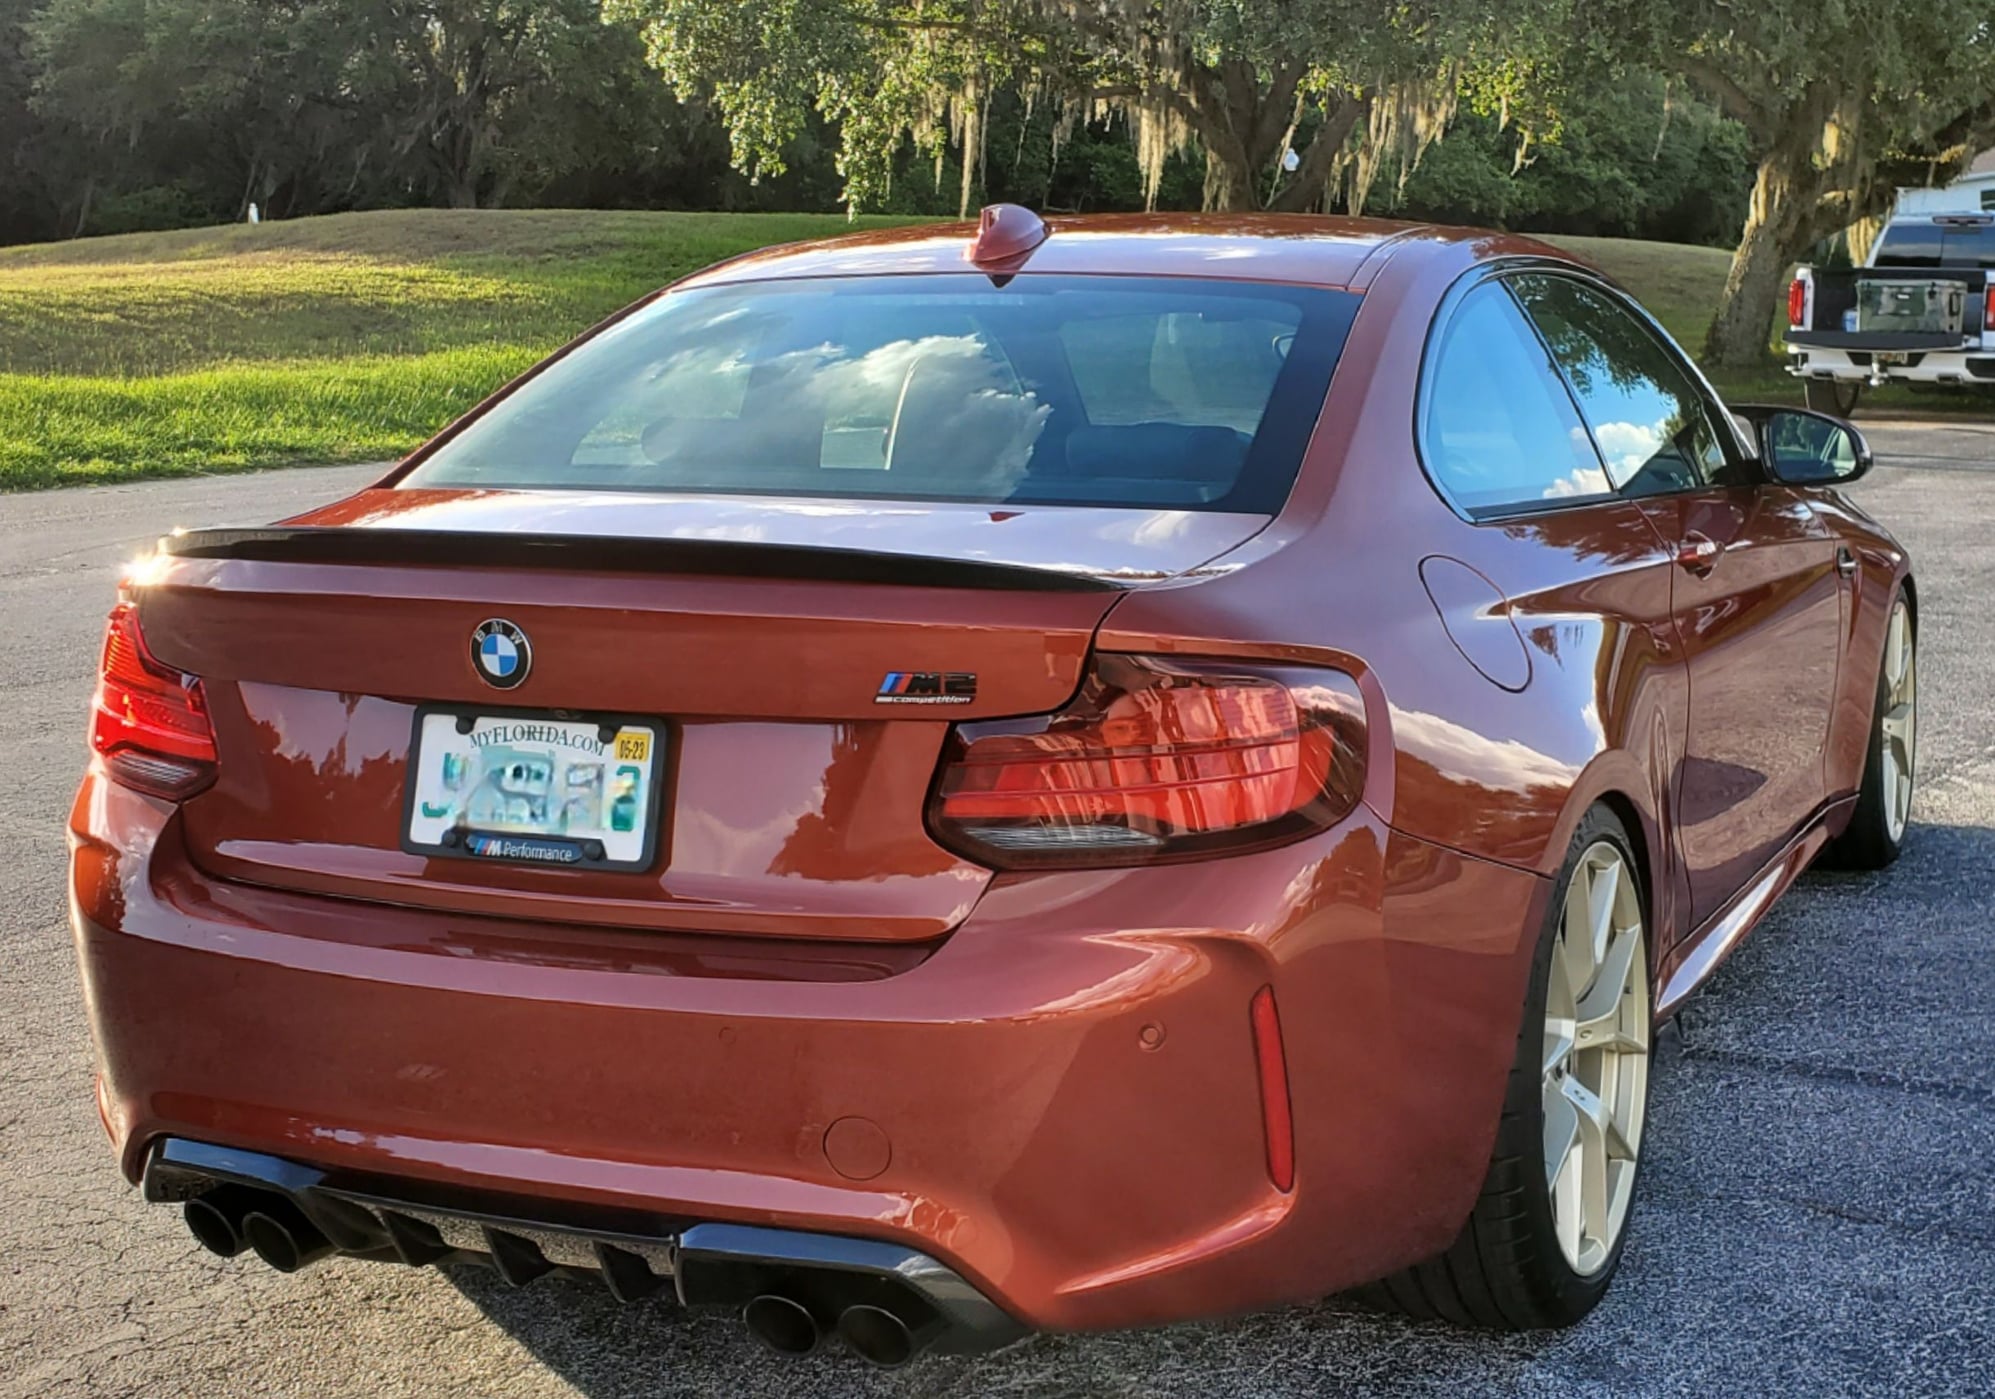 2020 BMW M2 - 2020 M2 Competition Sunset Orange M-DCT - Used - VIN WBS2U7C06L7E78724 - 8,950 Miles - 6 cyl - 2WD - Automatic - Coupe - Orange - Dade City, FL 33525, United States